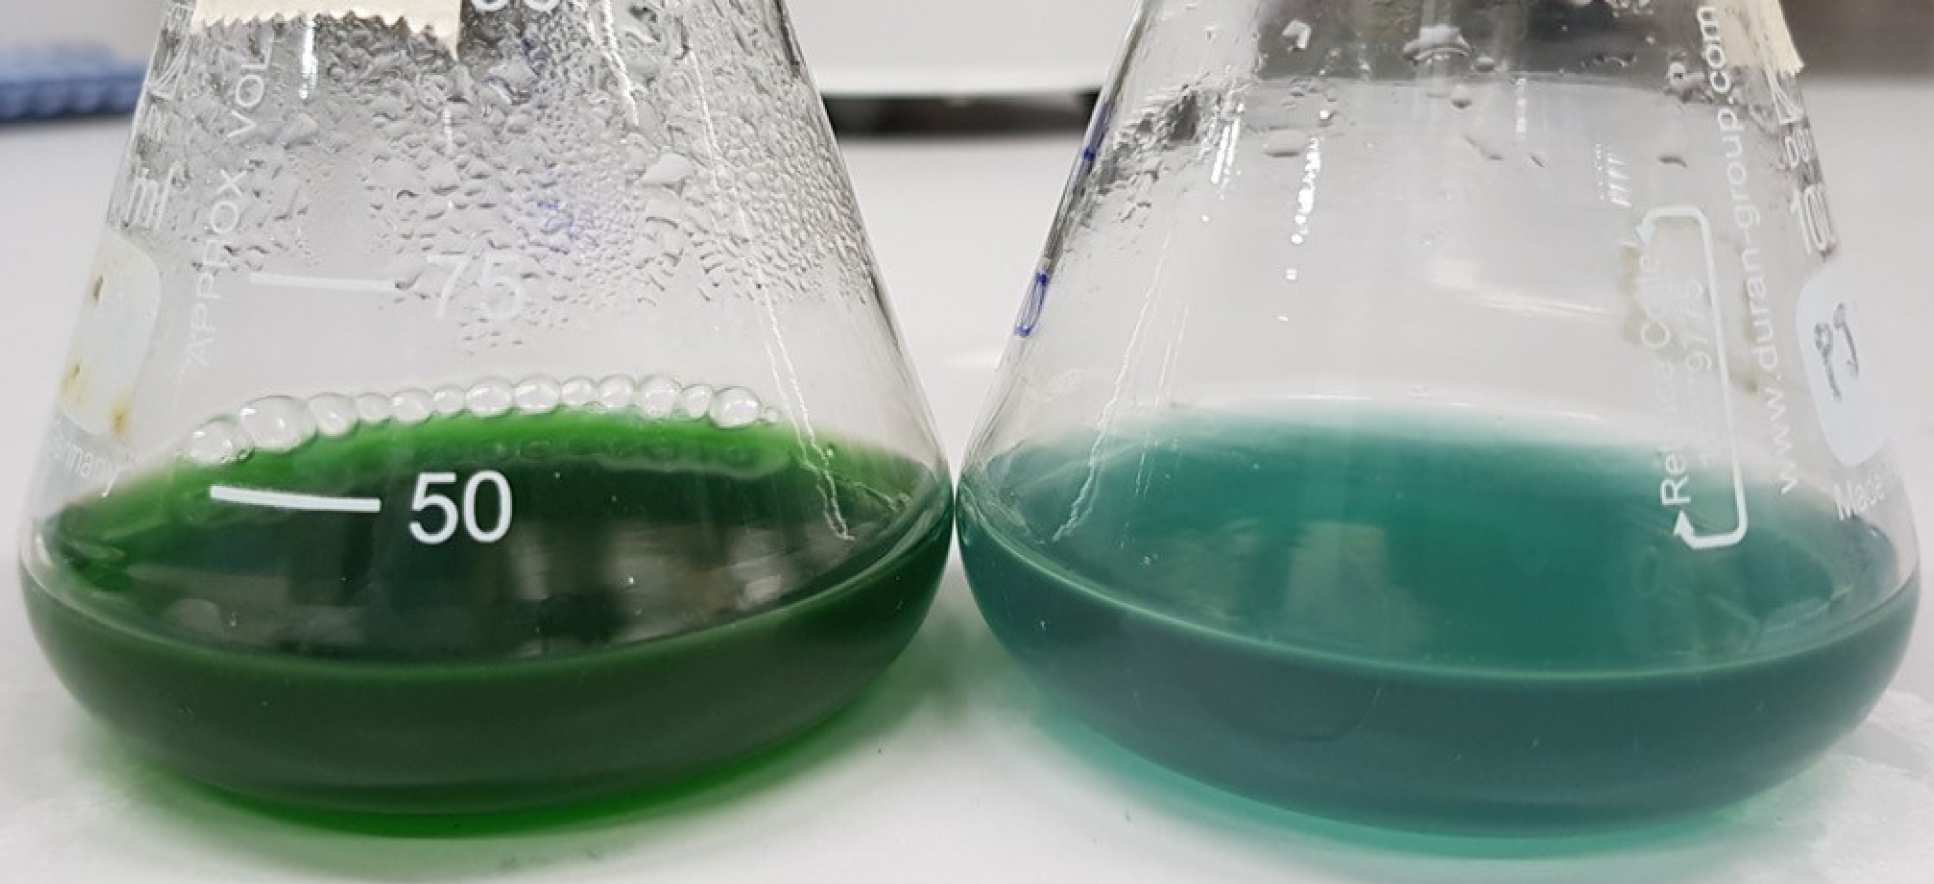 Two flasks of green liquid, the left one darker